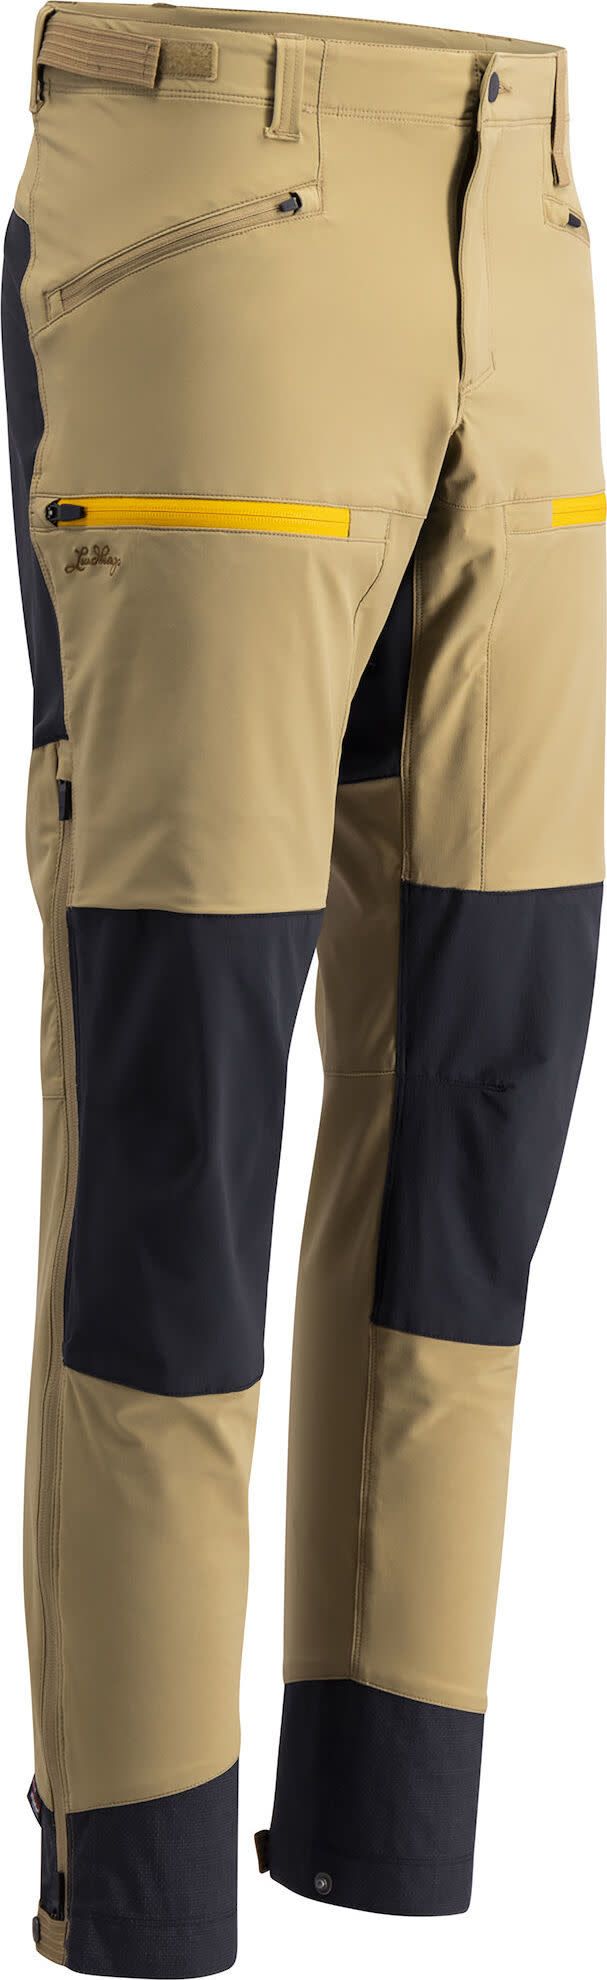 Lundhags Men's Padje Stretch Pant Dark Sand/Charcoal Lundhags